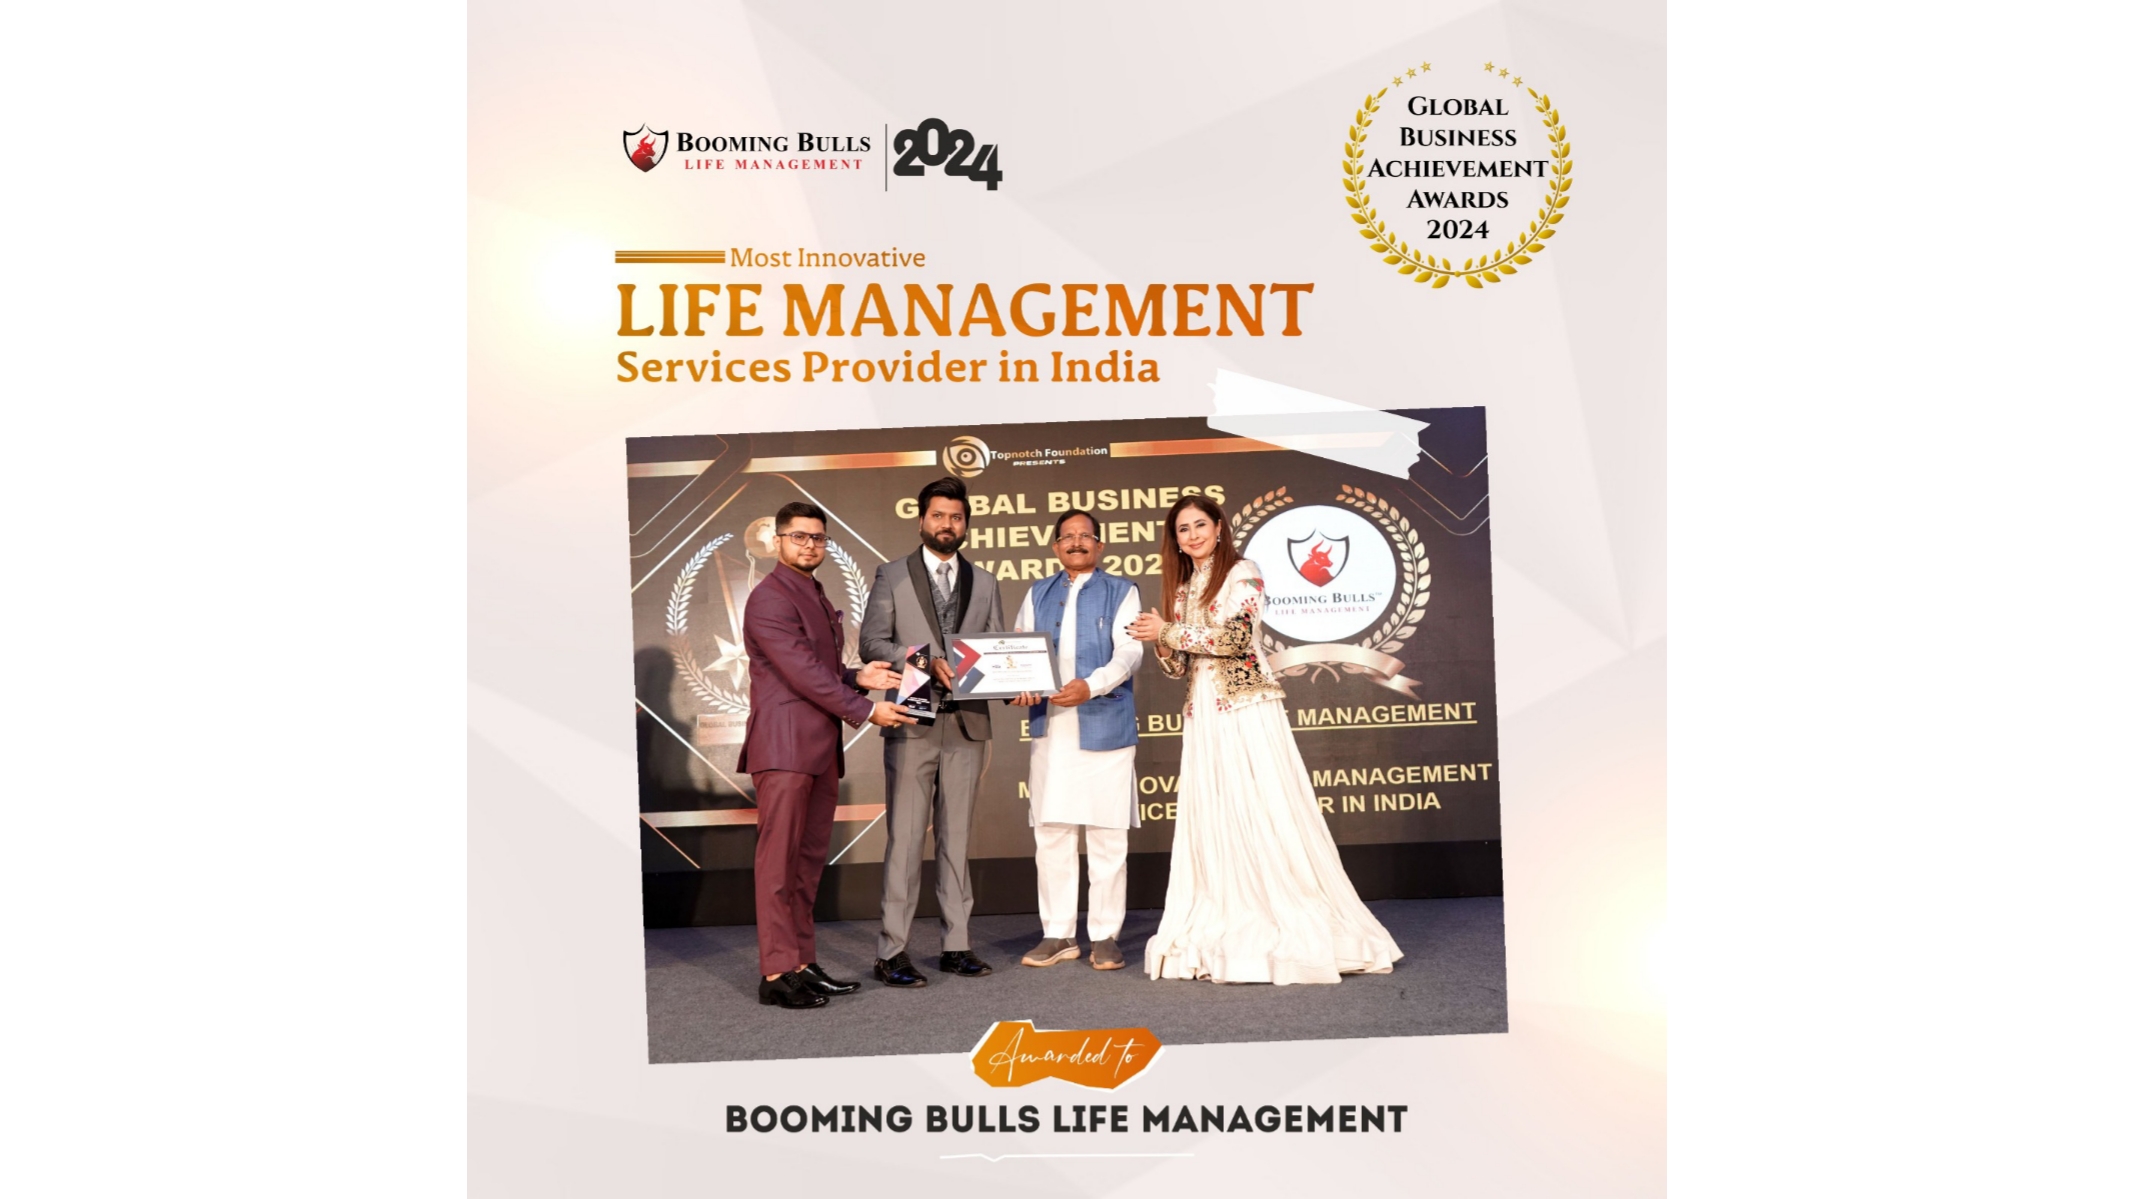 Why Most Innovative Life Management Services Provider Award Goes to Booming Bulls Life Management?